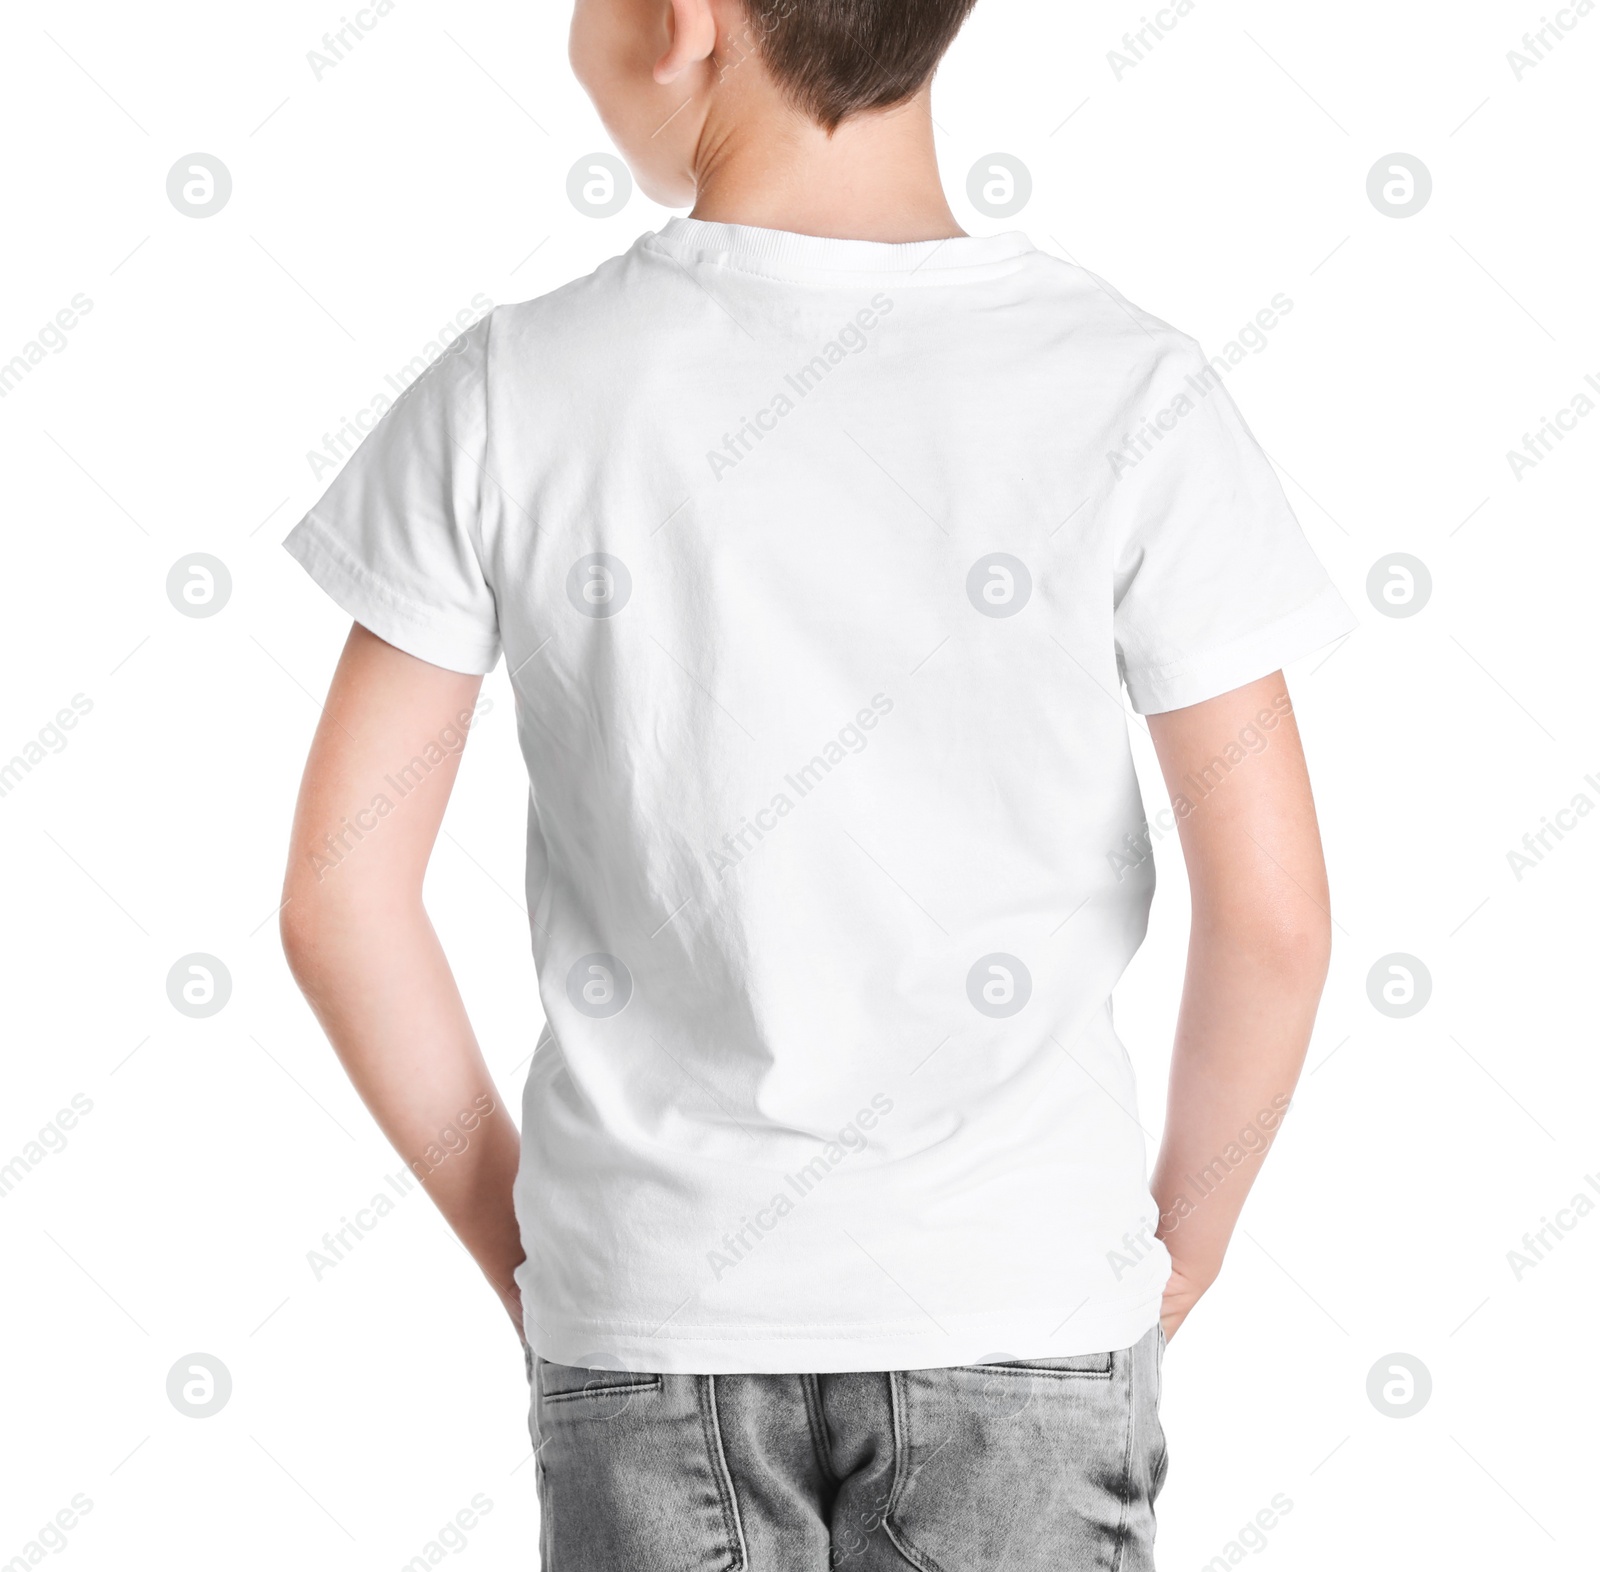 Photo of Little boy in t-shirt on white background. Mock-up for design